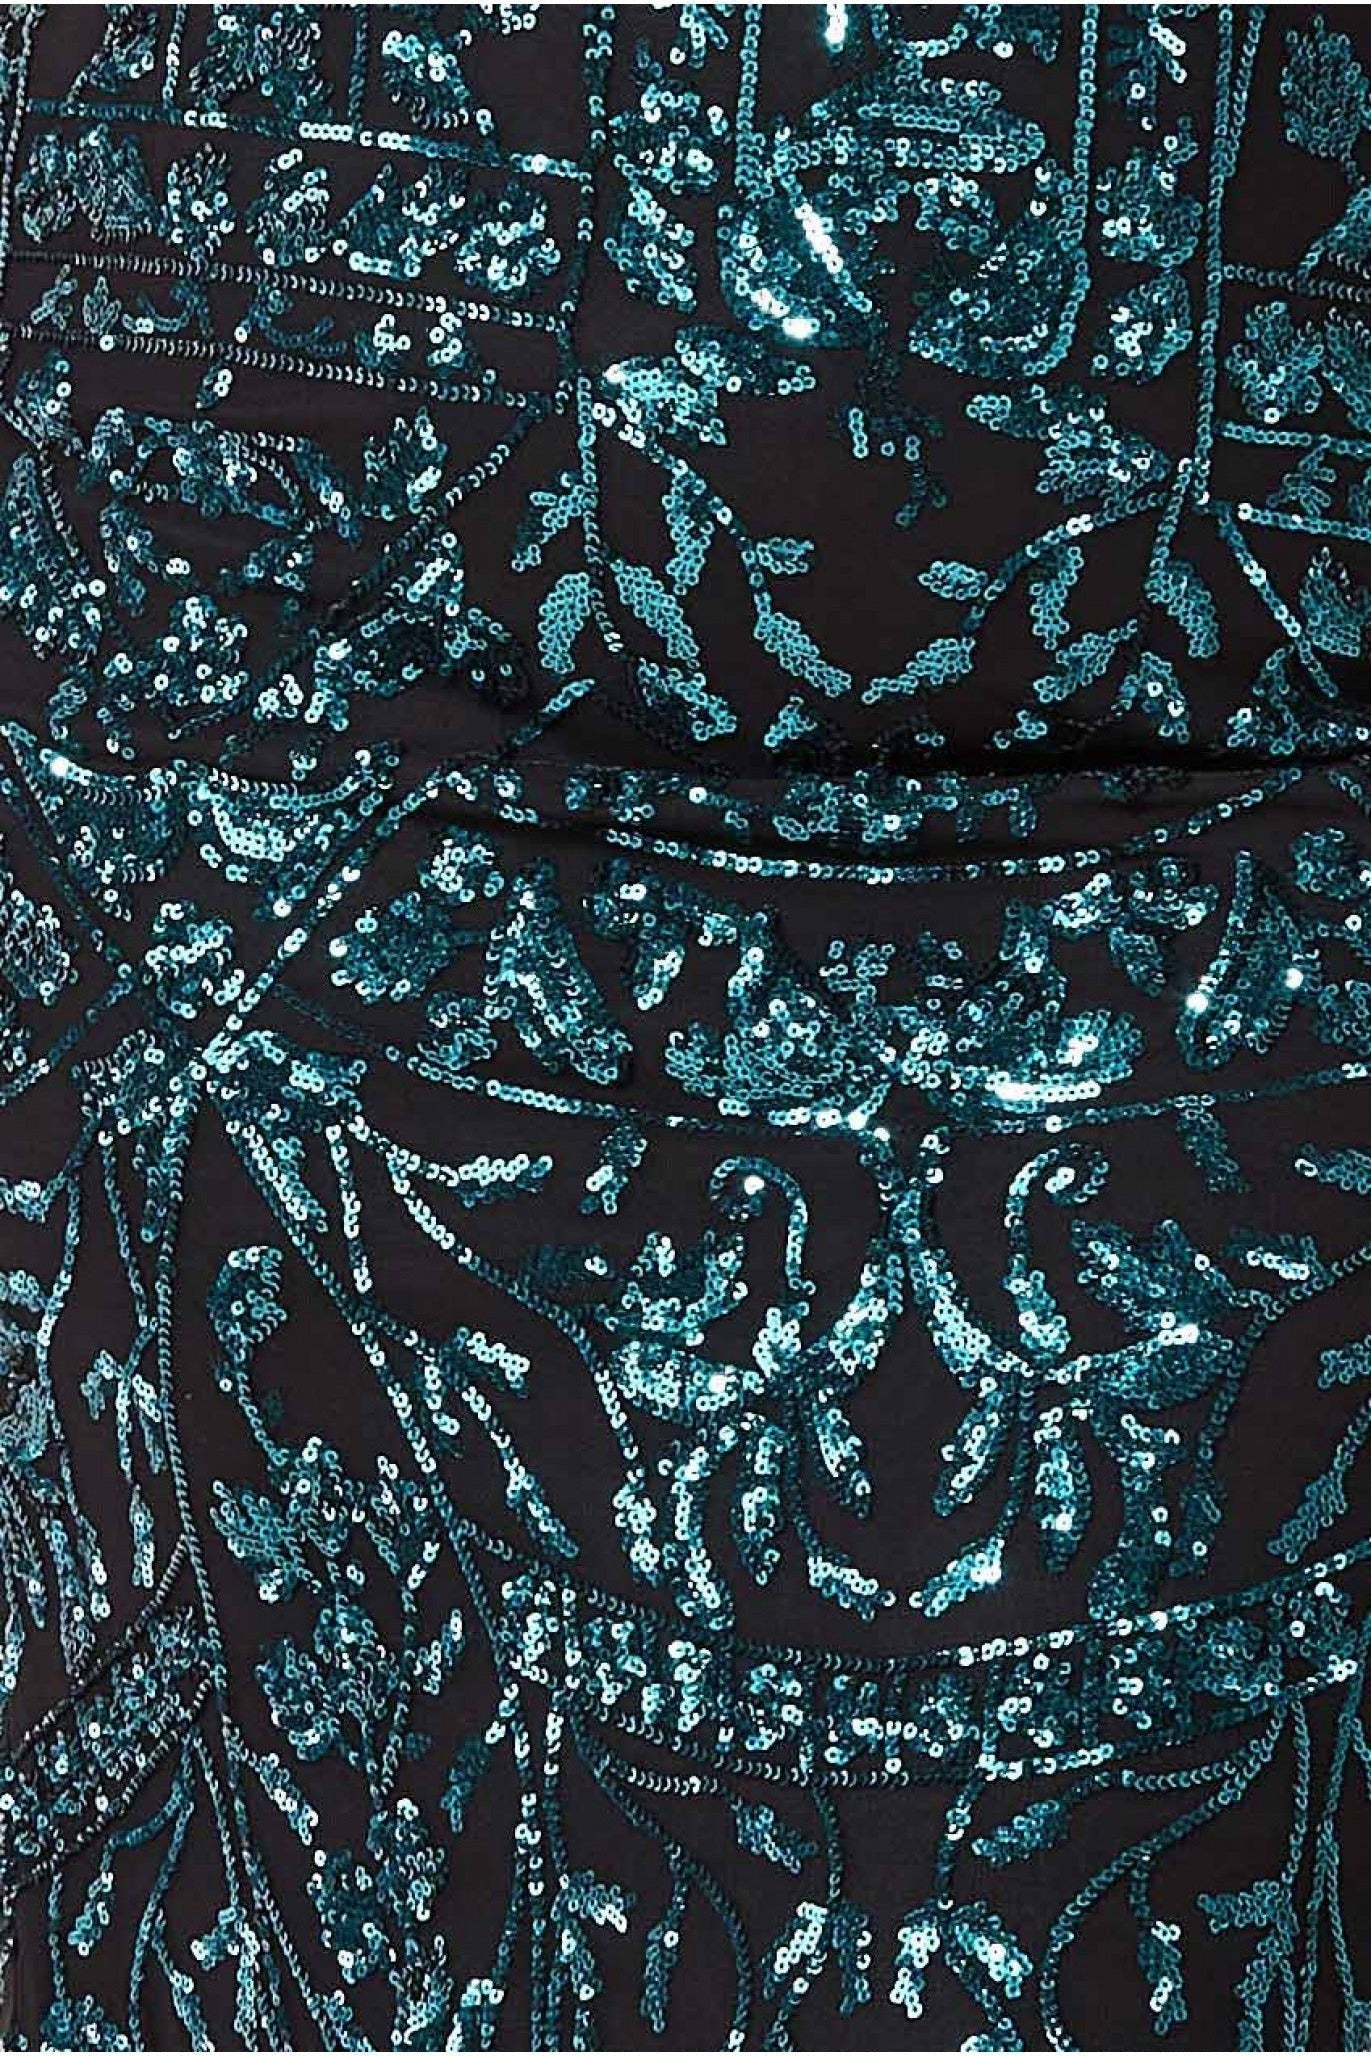 Sequin Mesh Embroidered Maxi Dress - Emerald DR3277P